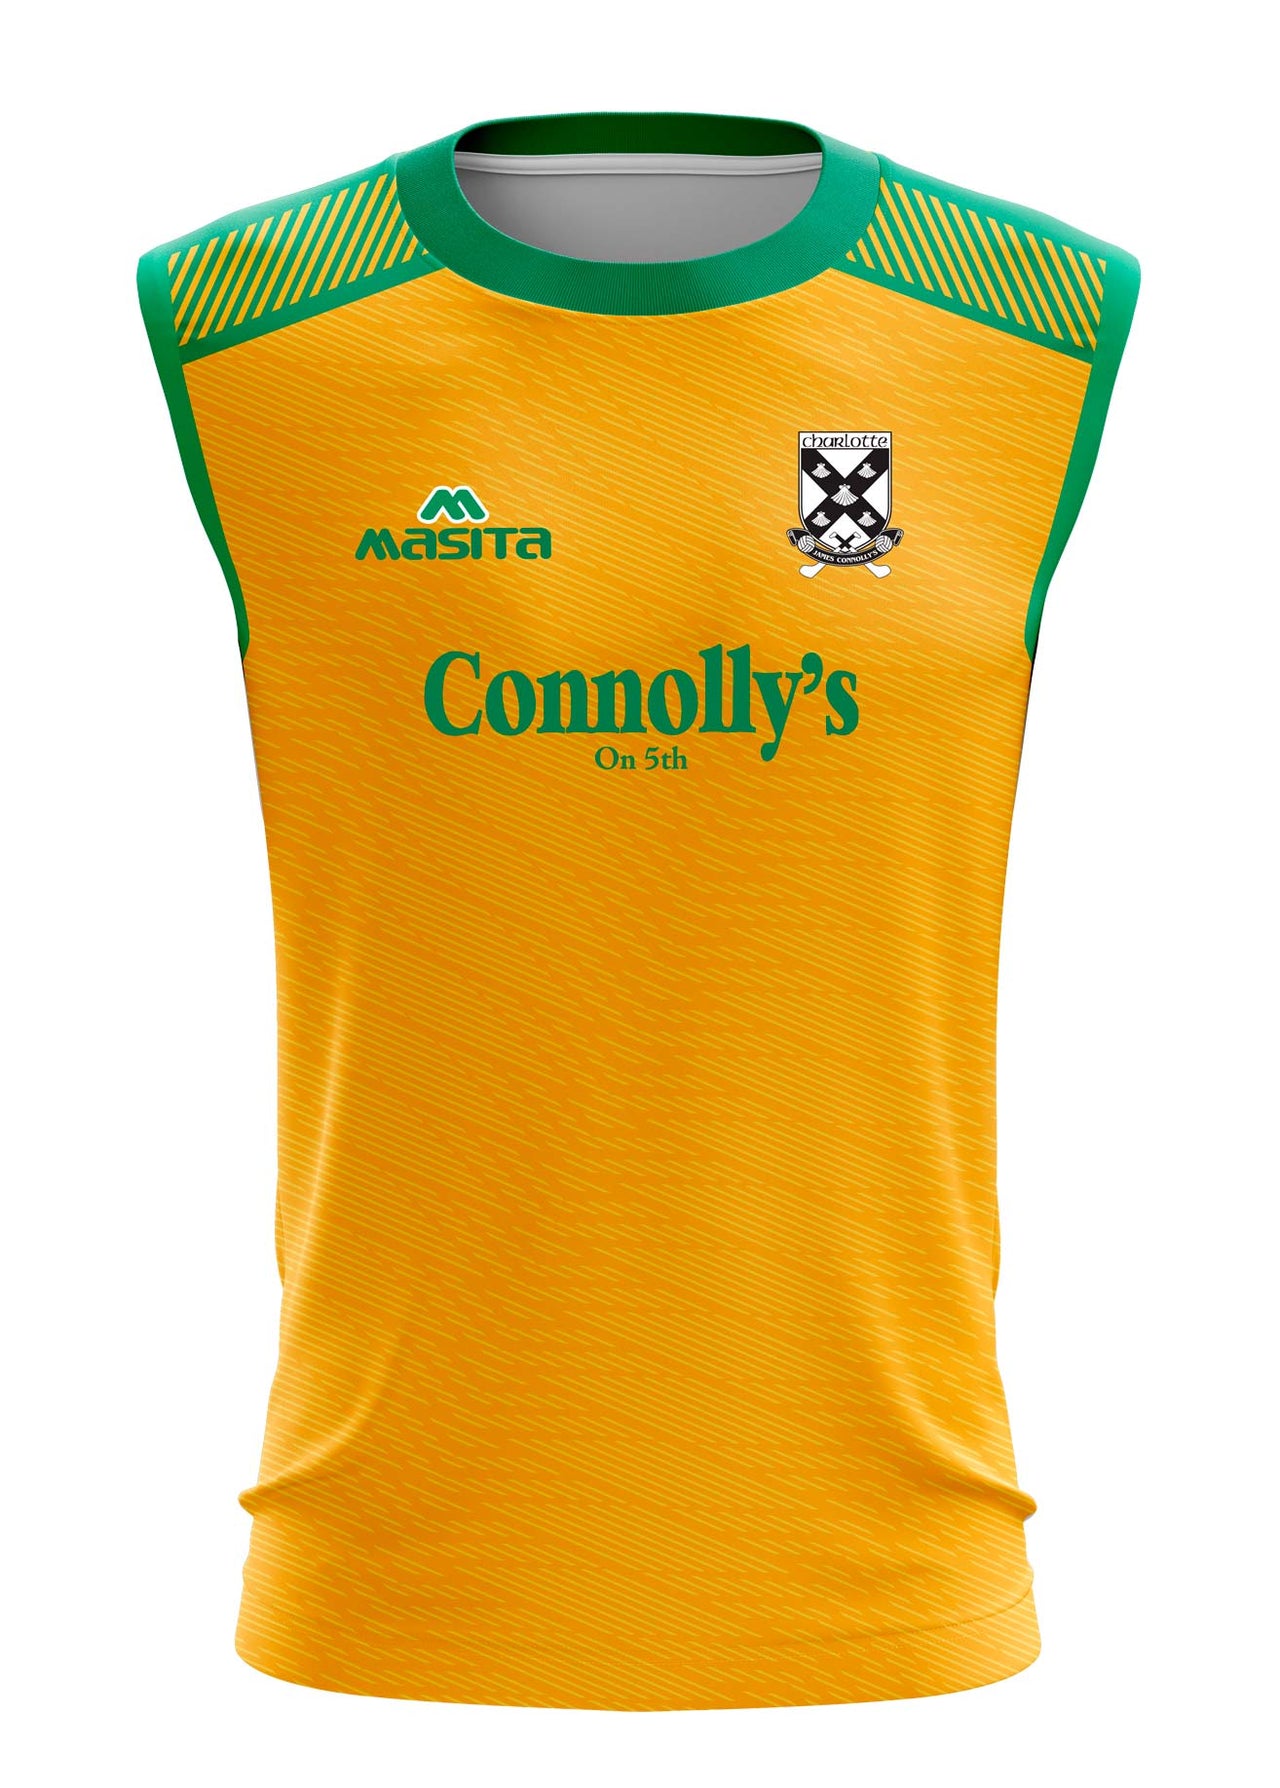 Charlotte James Connolly's Sleeveless Shirt Player Fit Adult